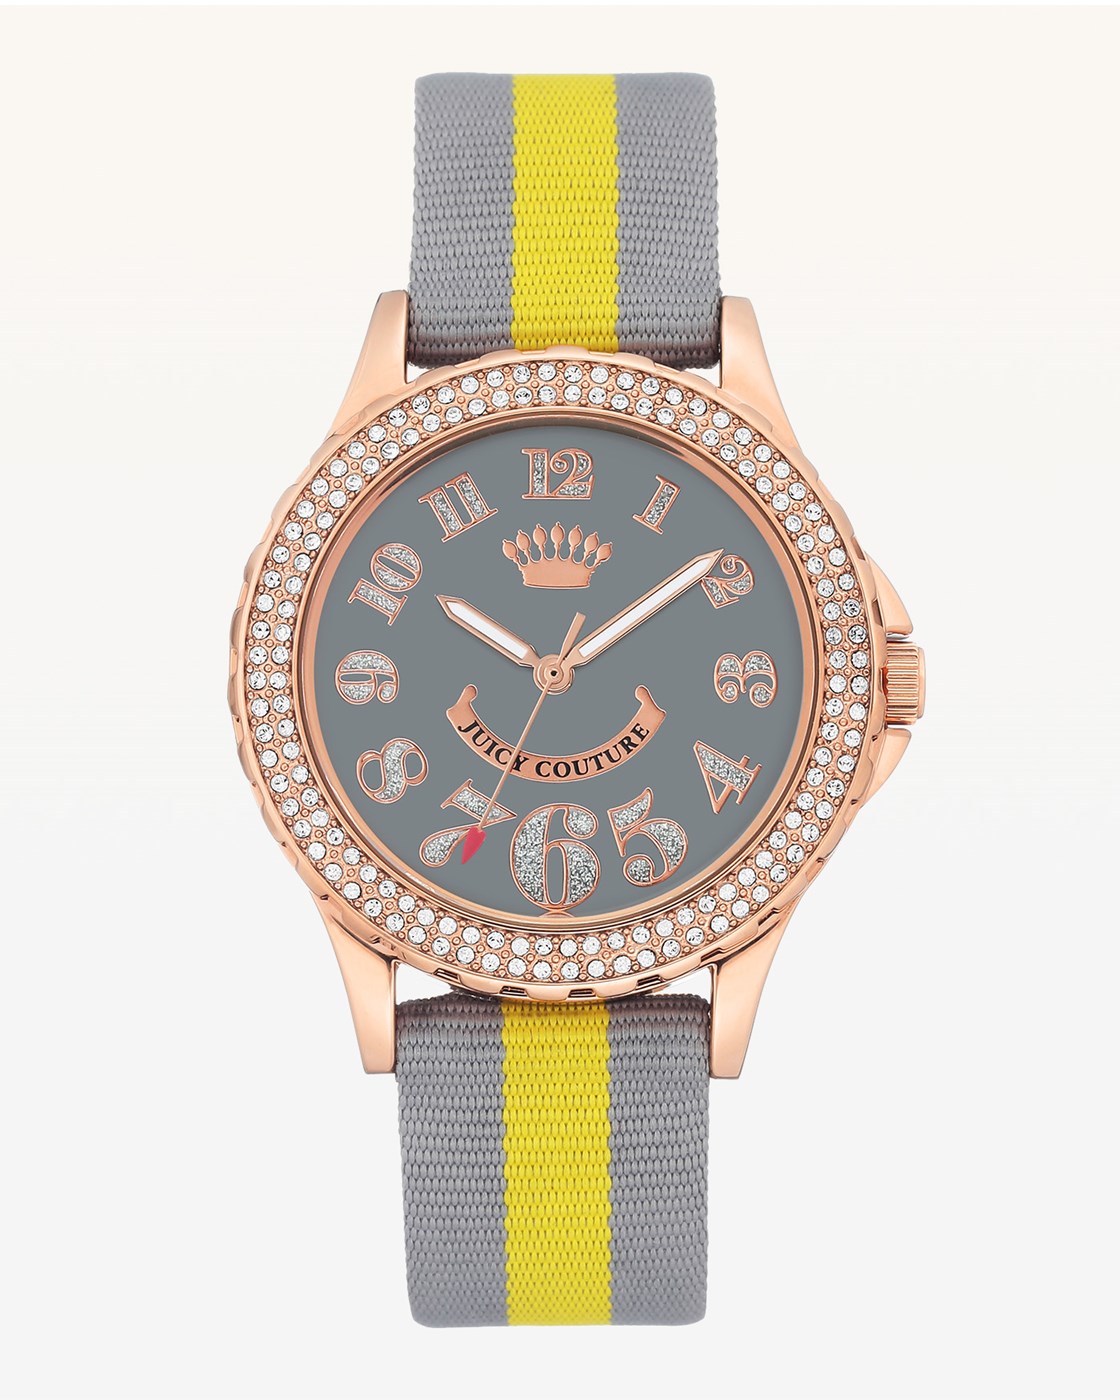 Juicy Couture Grey & Yellow Band Crystal Bezel Watch